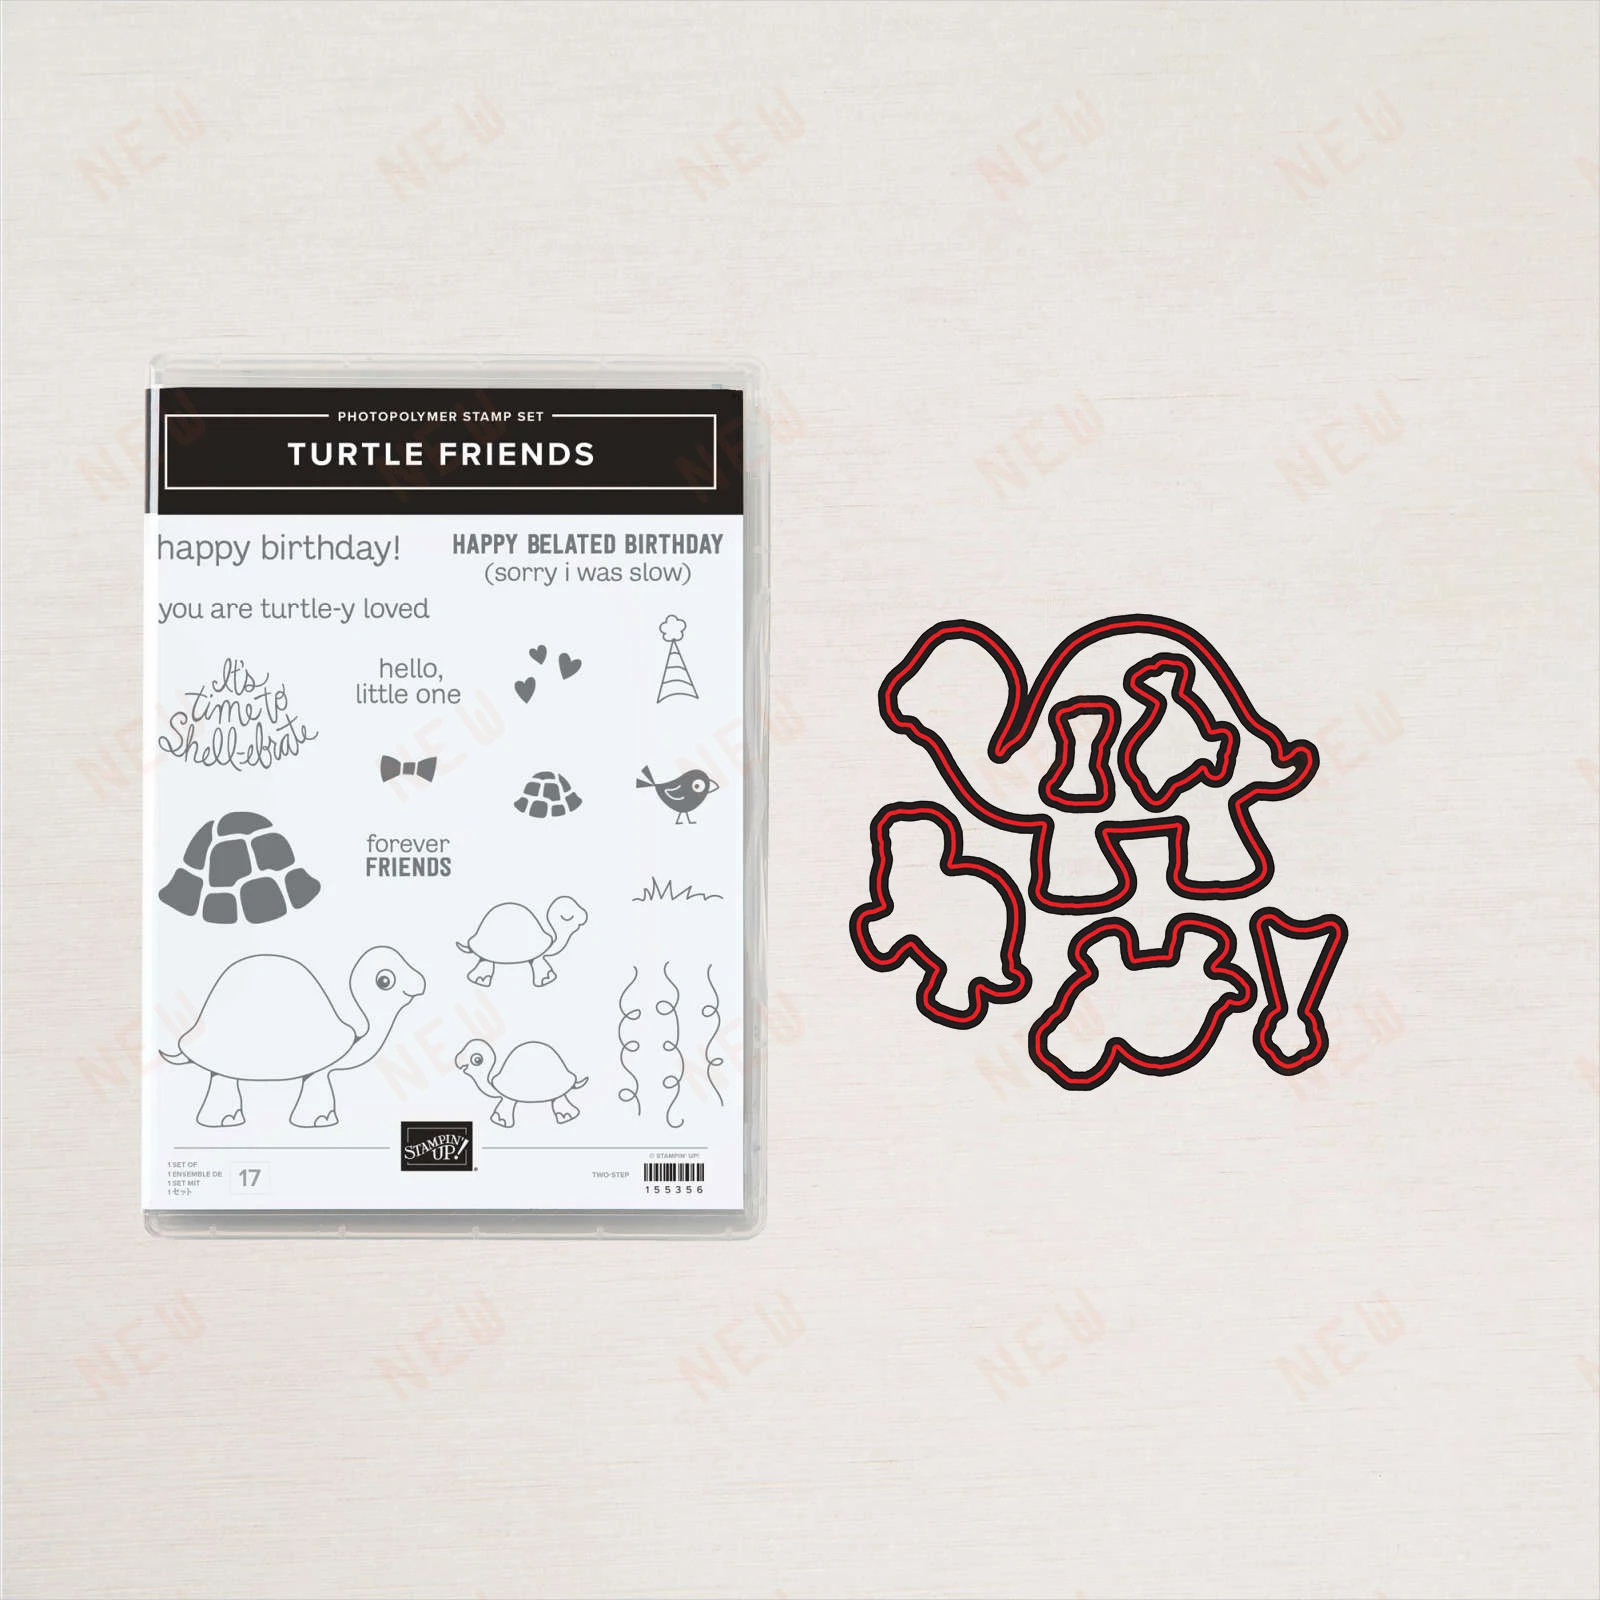 Happy belated birthday Metal Cutting Dies and Stamps For 2022 Scrapbook Diary Decoration Embossing DIY Greeting